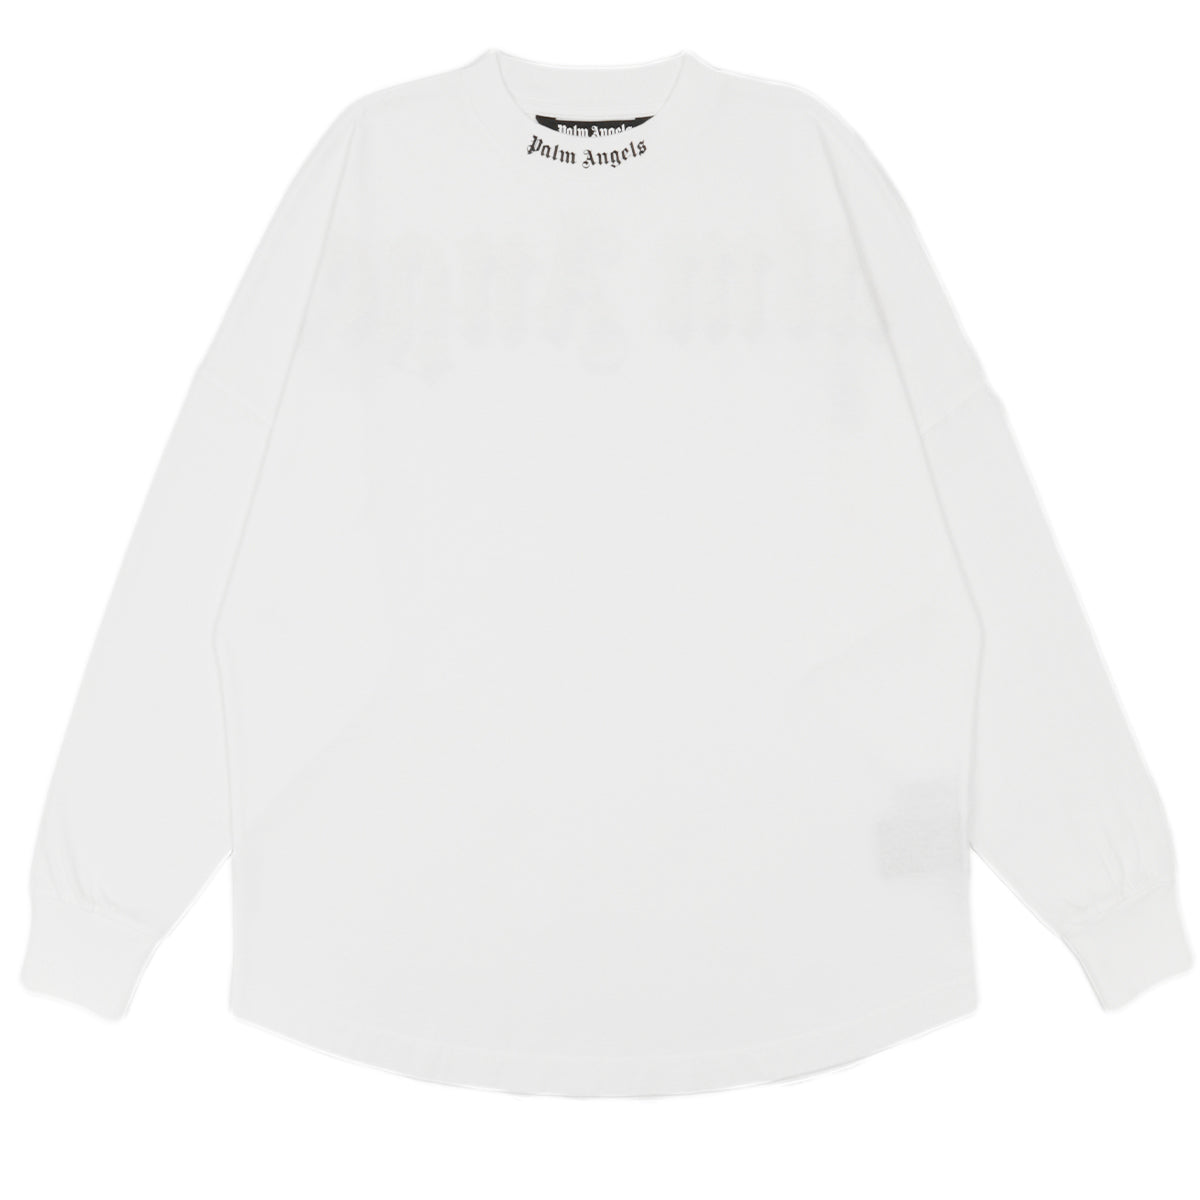 Palm Angels (パーム・エンジェルス) - DOUBLE LOGO OVER L/S TEE T 